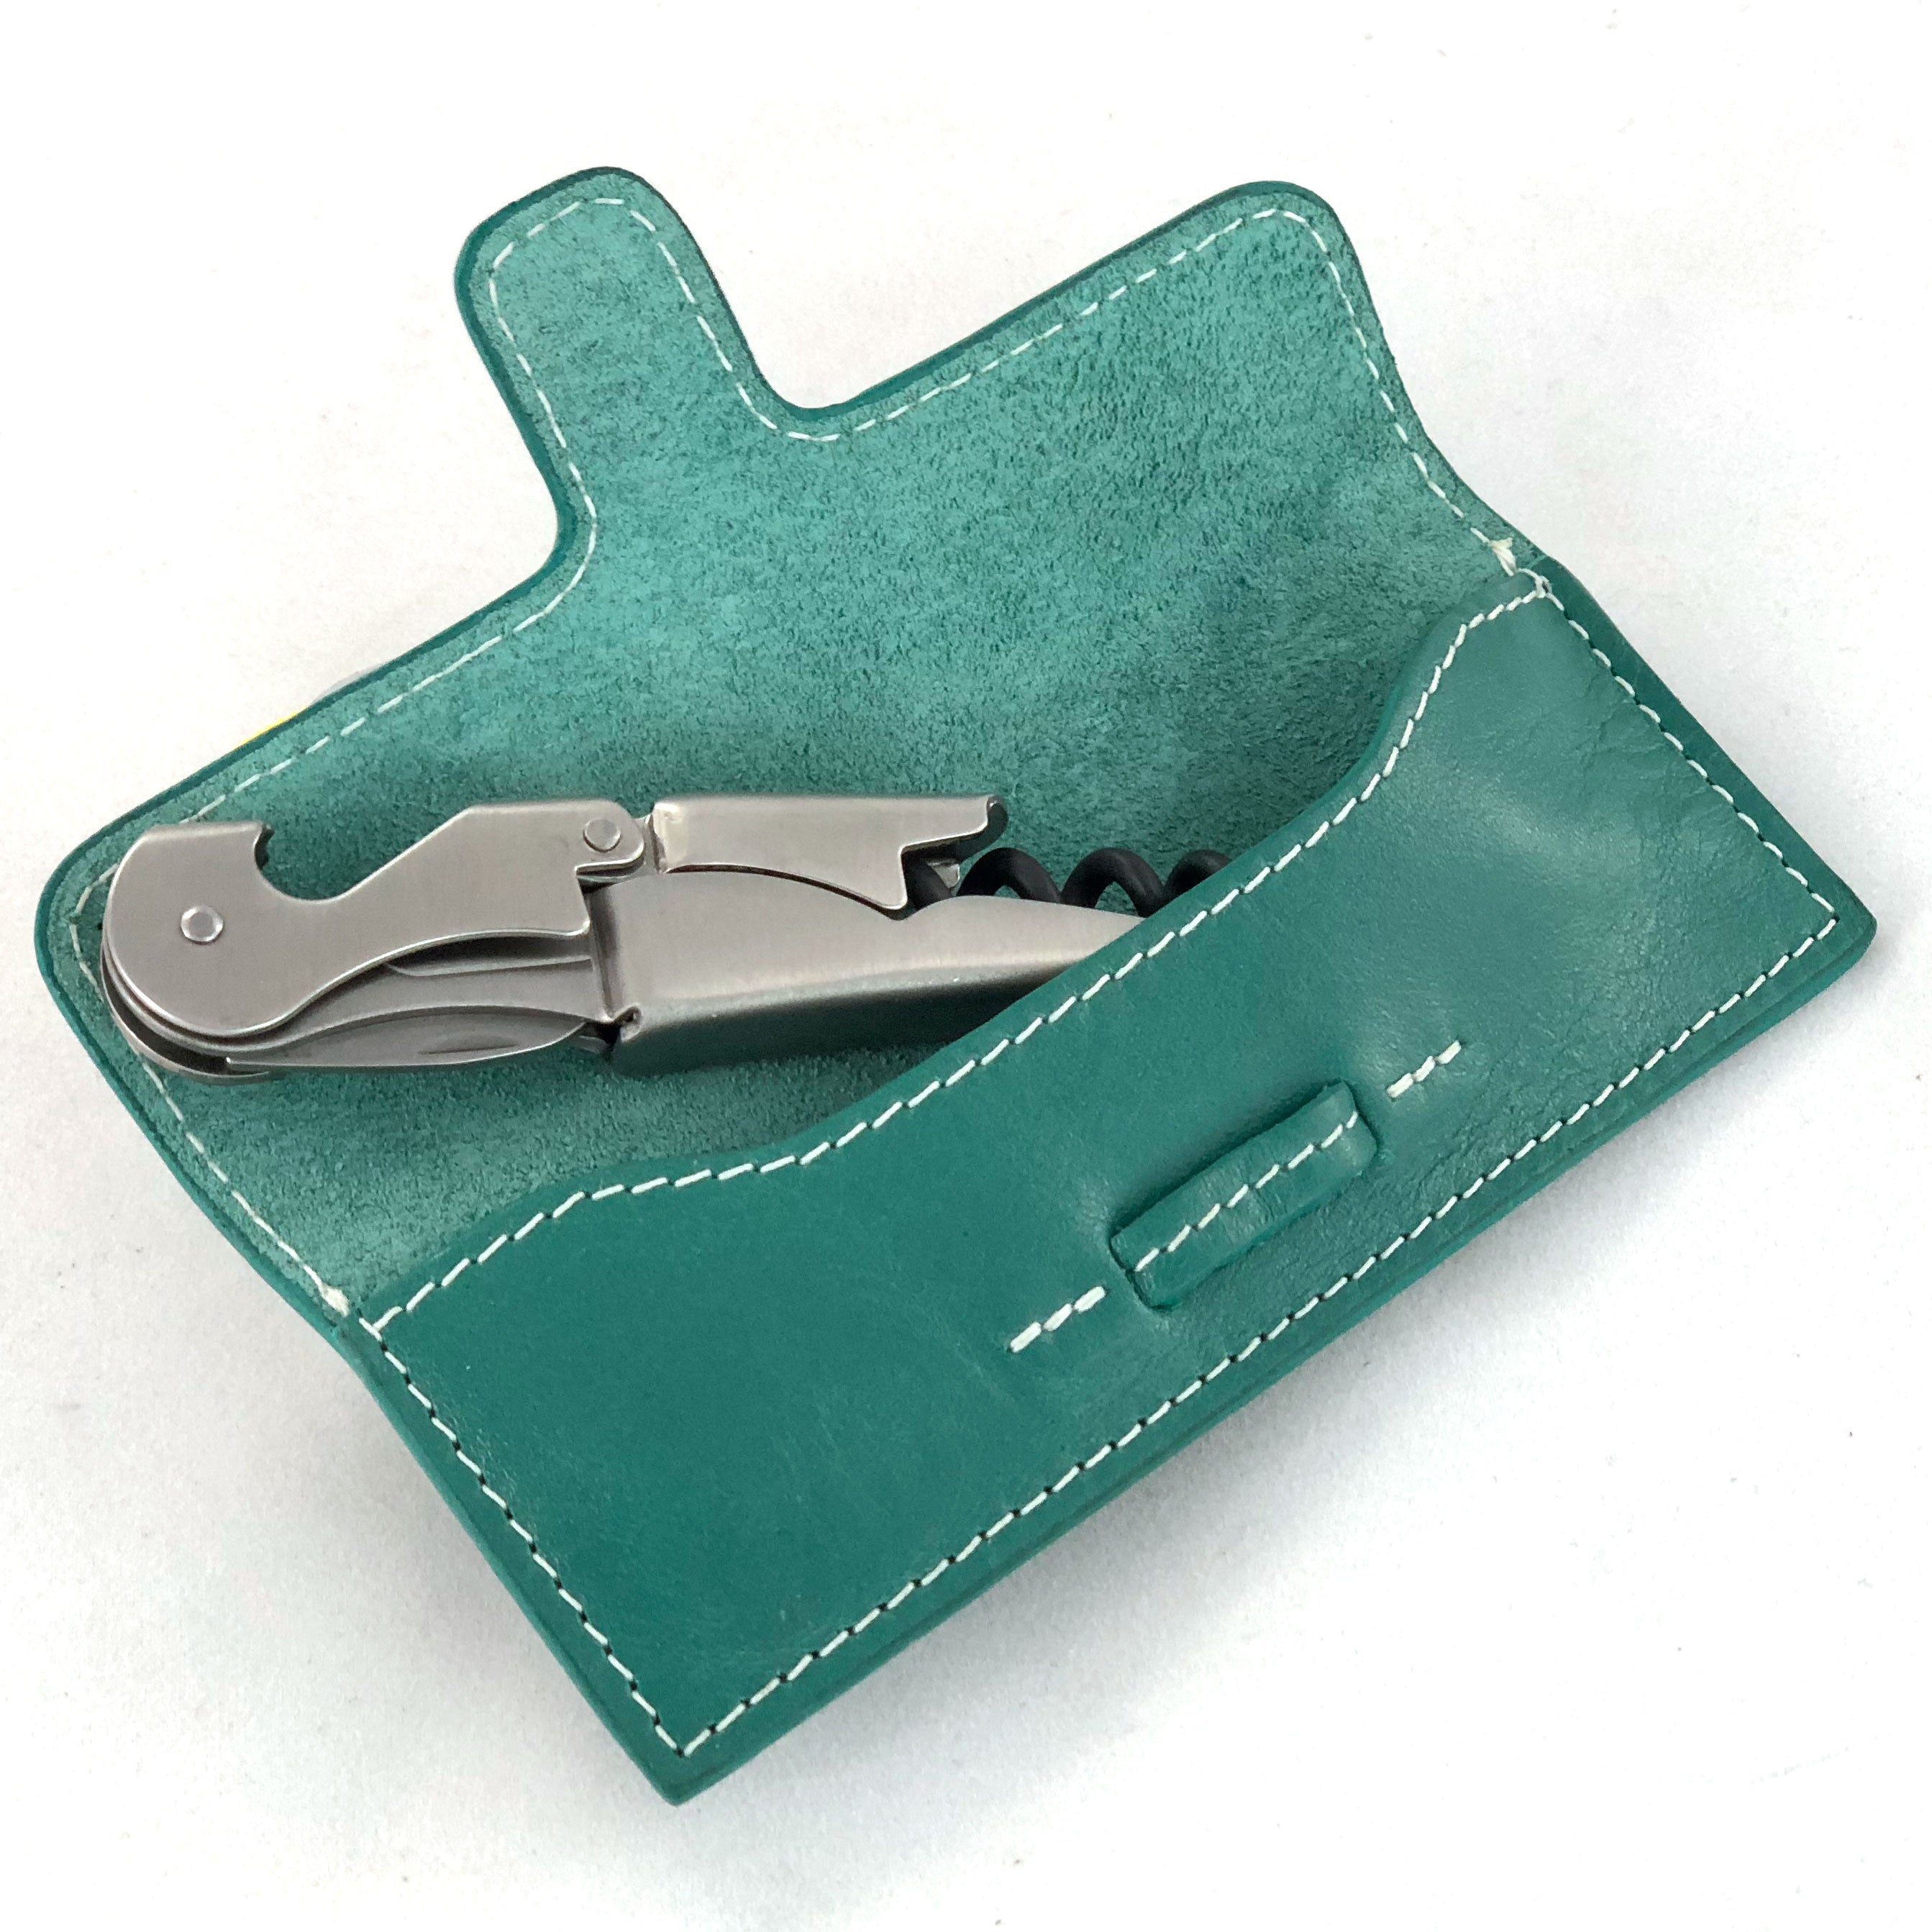 Leather case with stainless steel corkscrew, shown open from front.